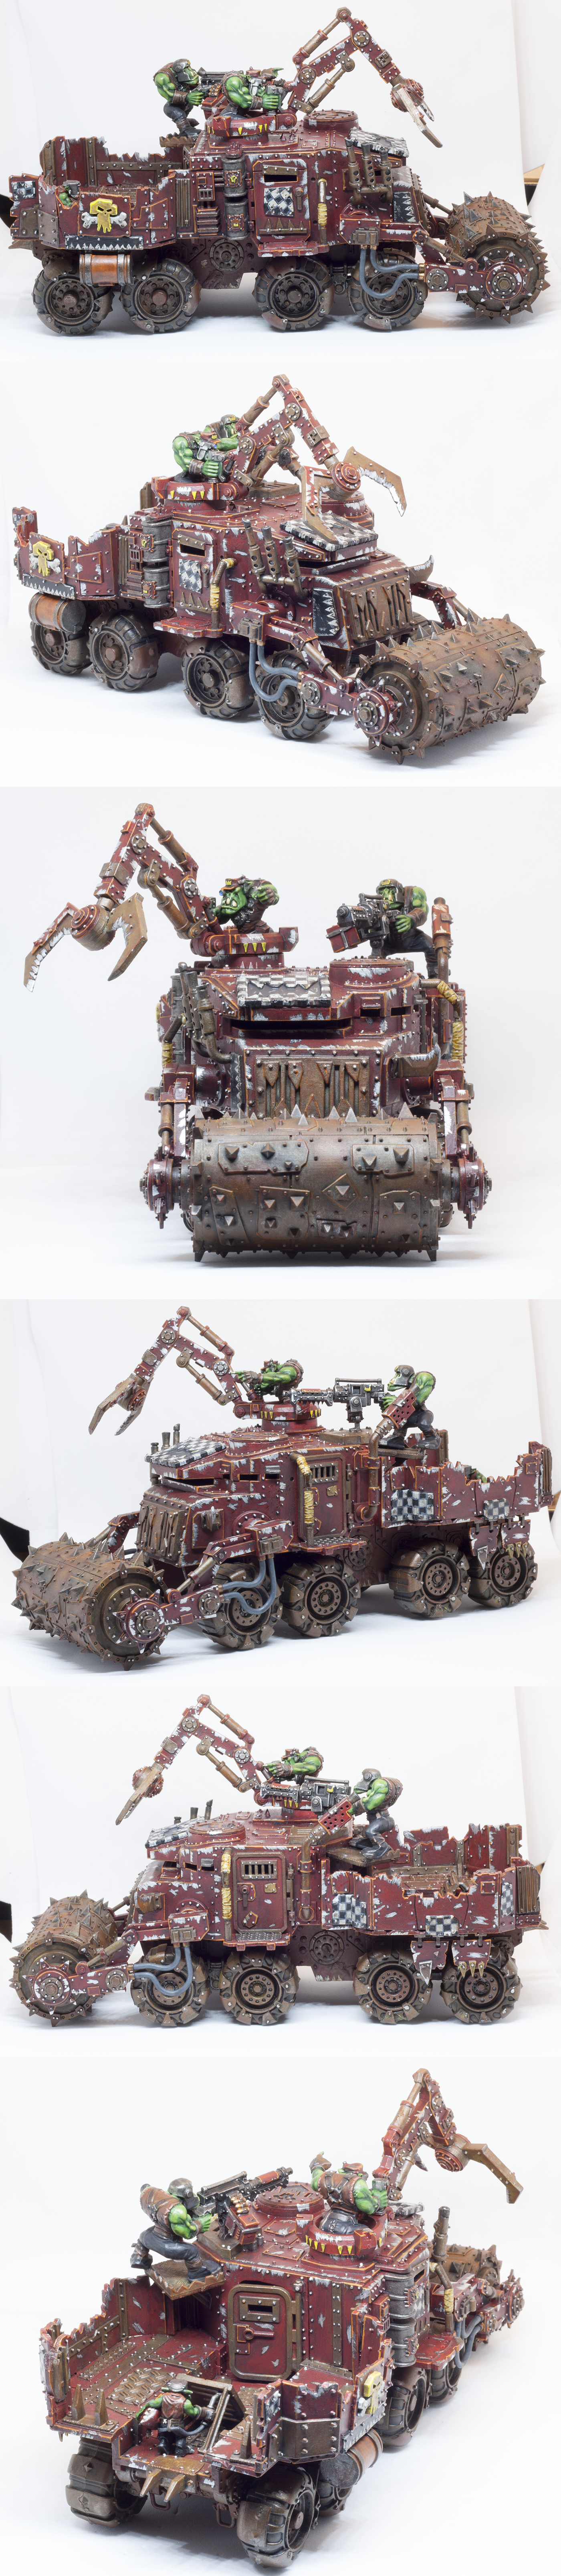 Checkers, Chipping, Evil Sunz, Heavy, Ork. Battlewagon, Red, Rust, Speed Freaks, Speed Freeks, Tank, Vehicle, Waaagh, Weathered